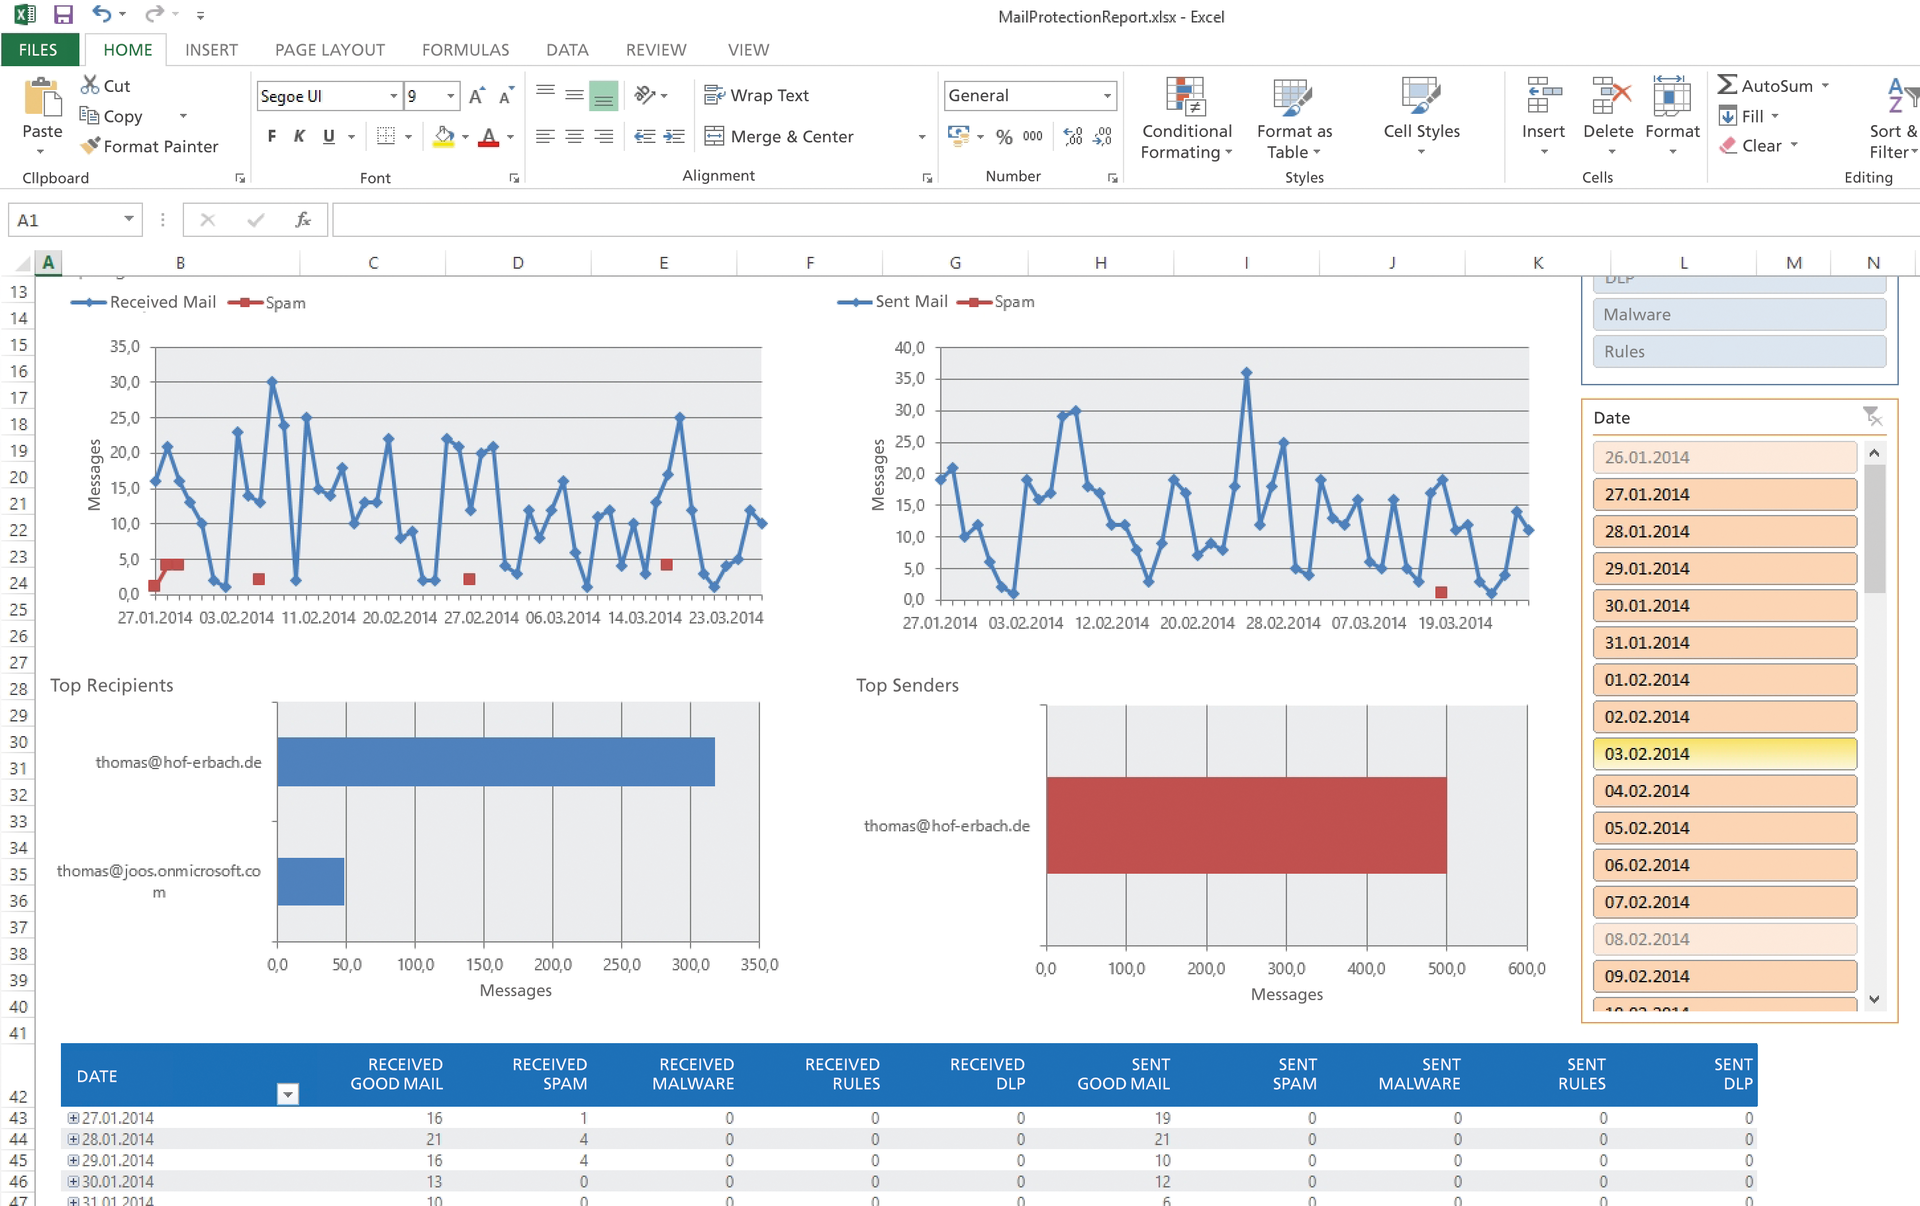 Comprehensive analyses can be conducted using the Mail Protection Reports tool for Office 365. 